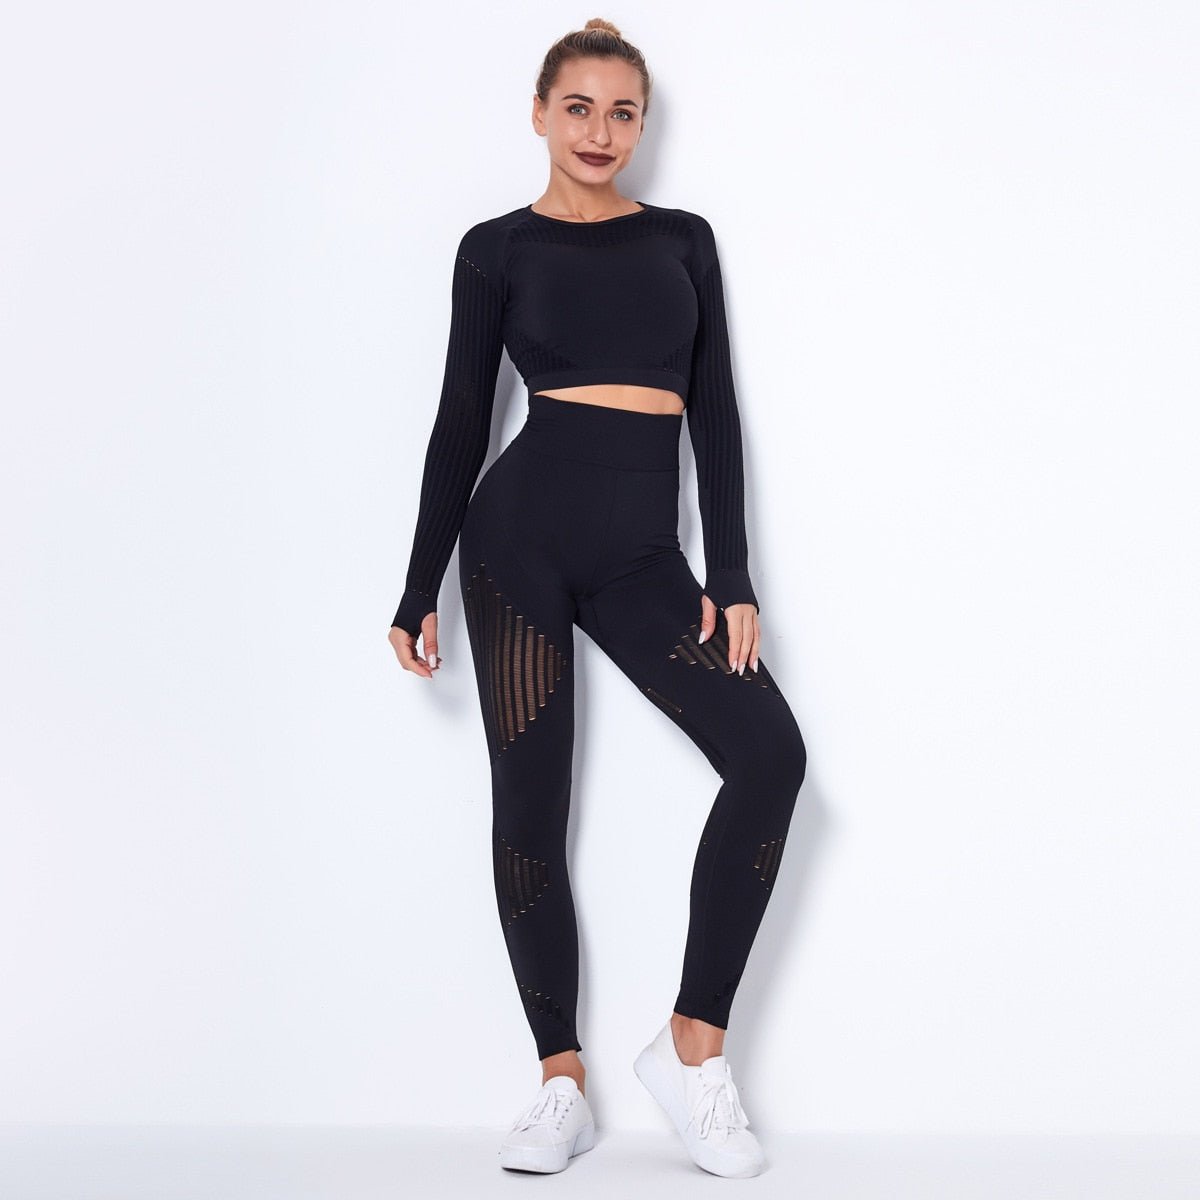 Hollow Out Seamless Yoga Set Sport Outfits Women Black Two 2 Piece Crop Top Bra Leggings Workout Gym suit Fitness Sport Sets - Linions